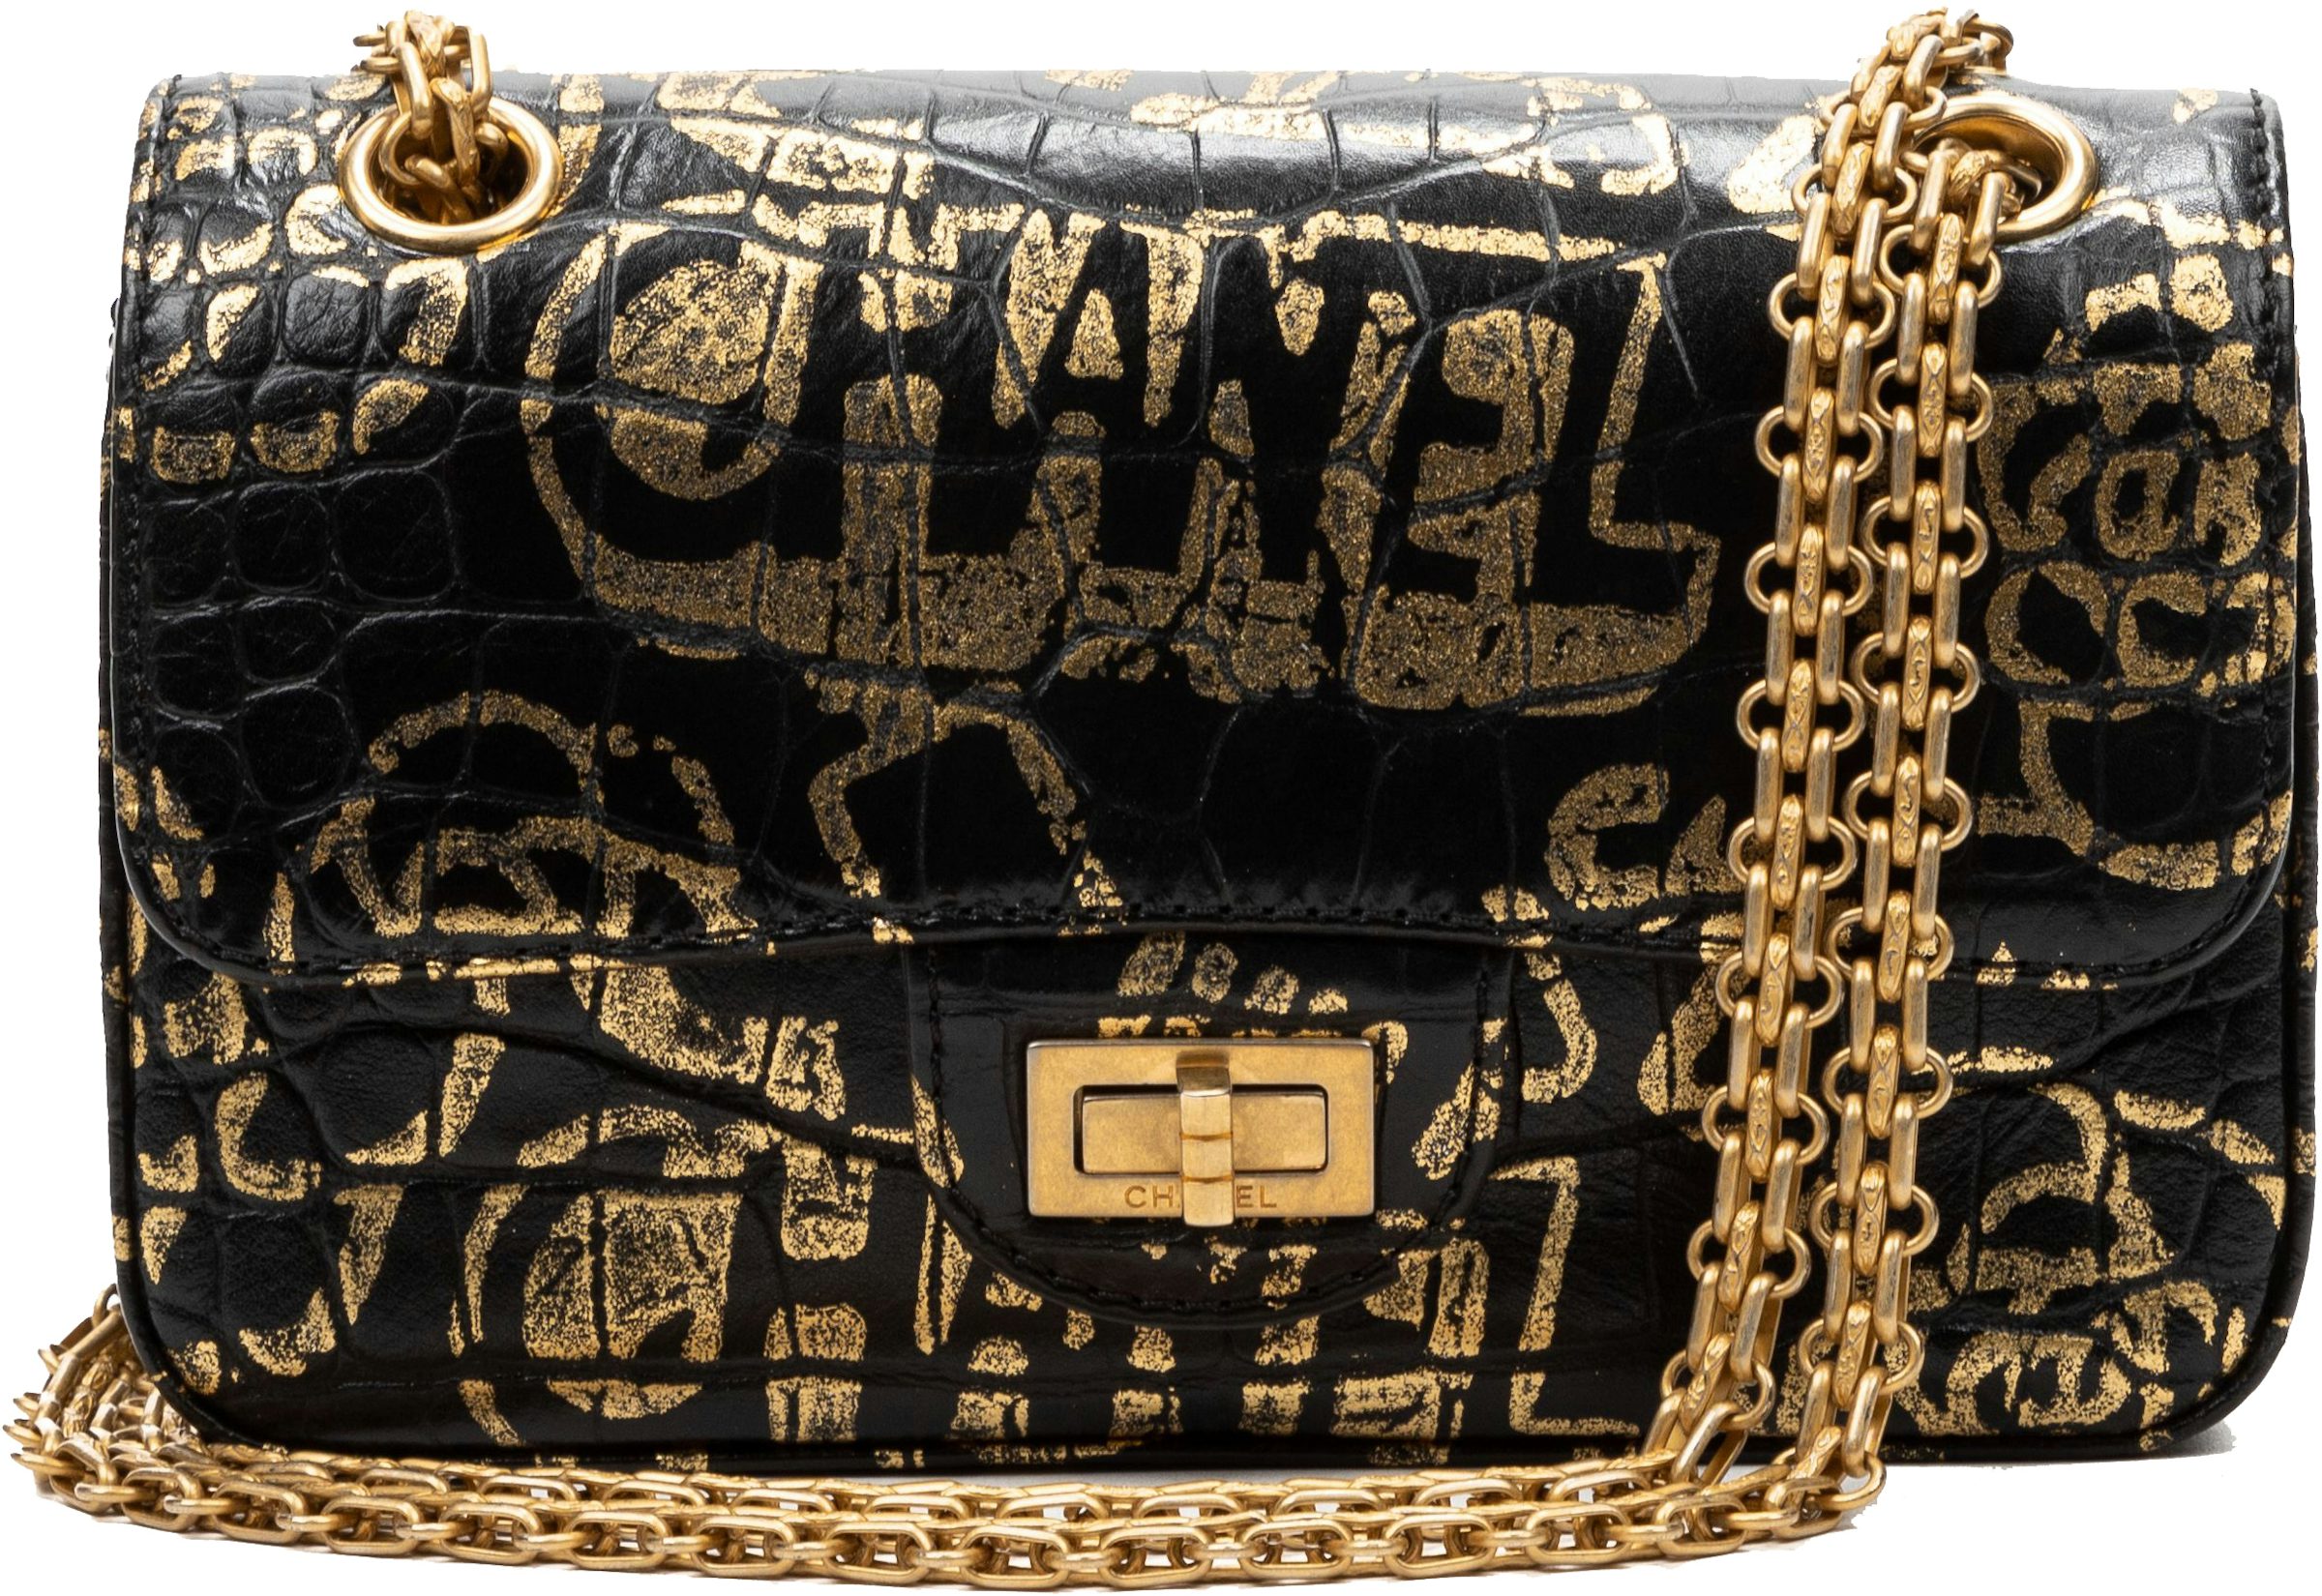 CHANEL graffiti Backpack for Women - Vestiaire Collective